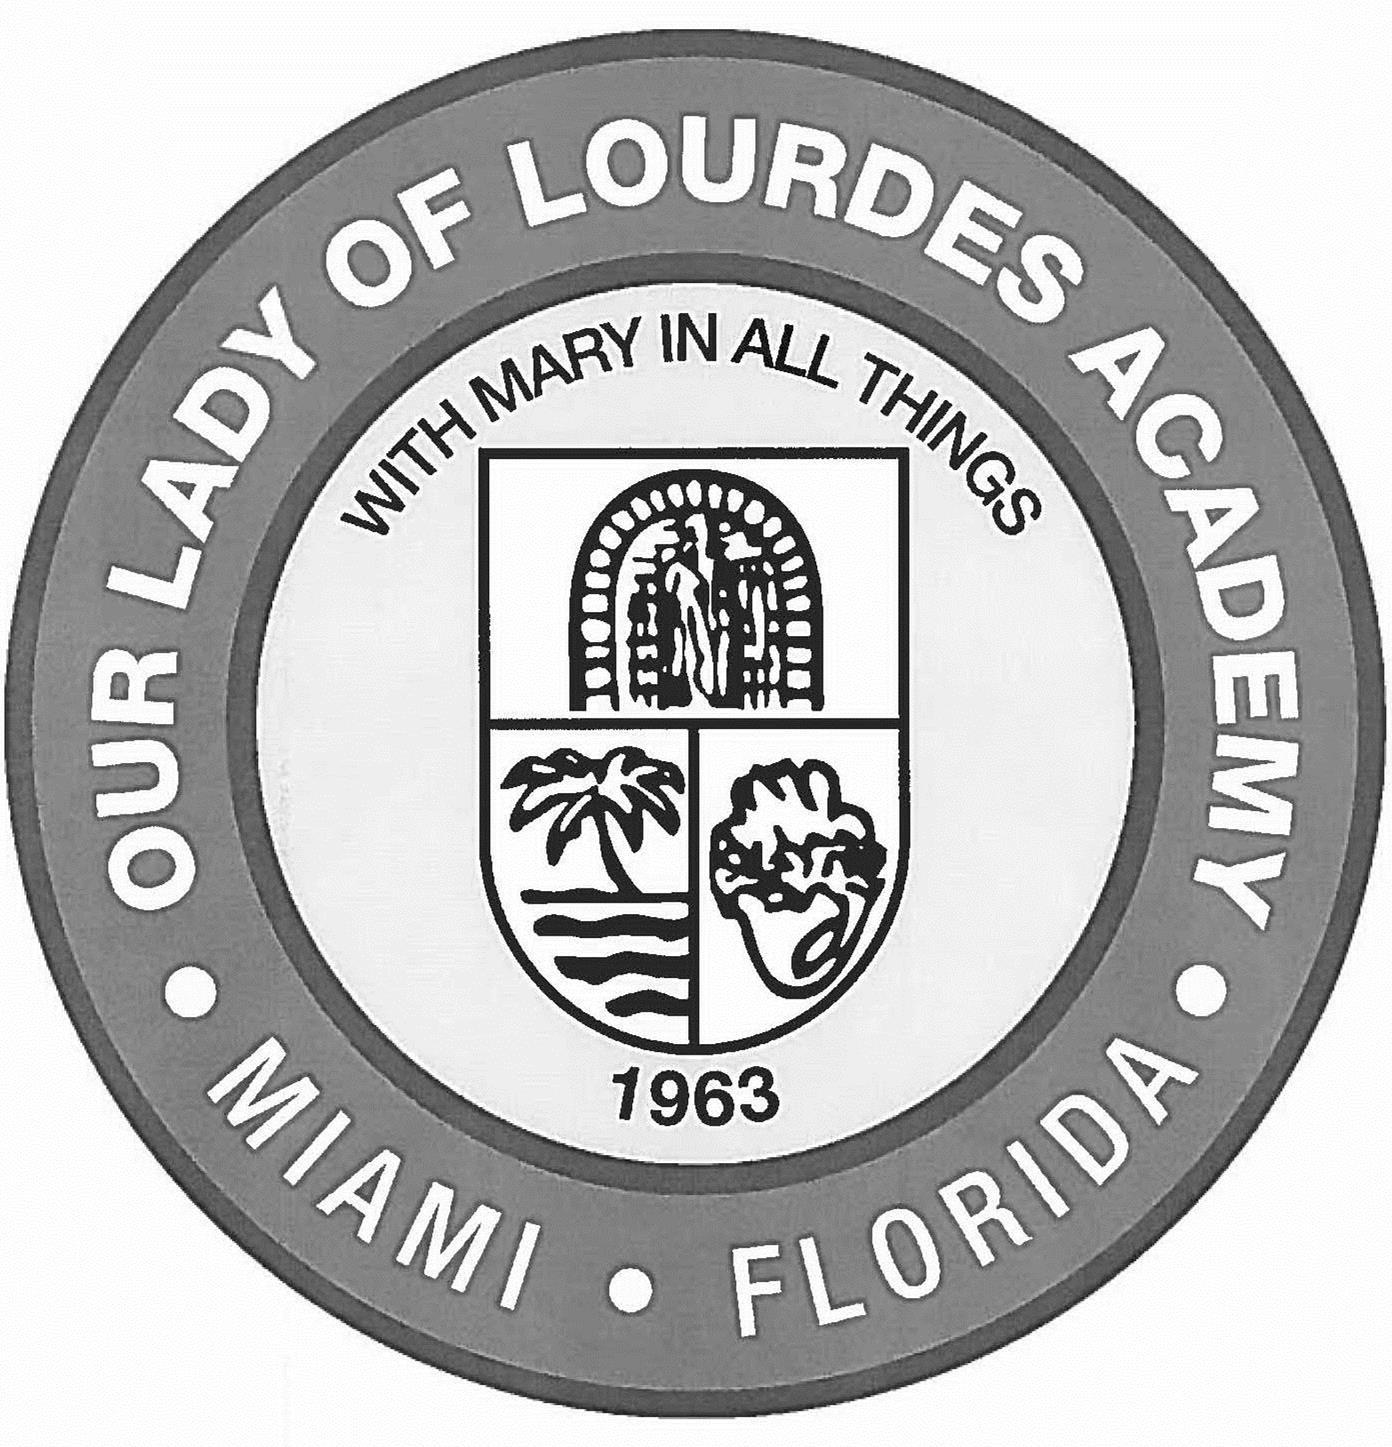  OUR LADY OF LOURDES ACADEMY Â· MIAMI Â· FLORIDA Â· WITH MARY IN ALL THINGS 1963